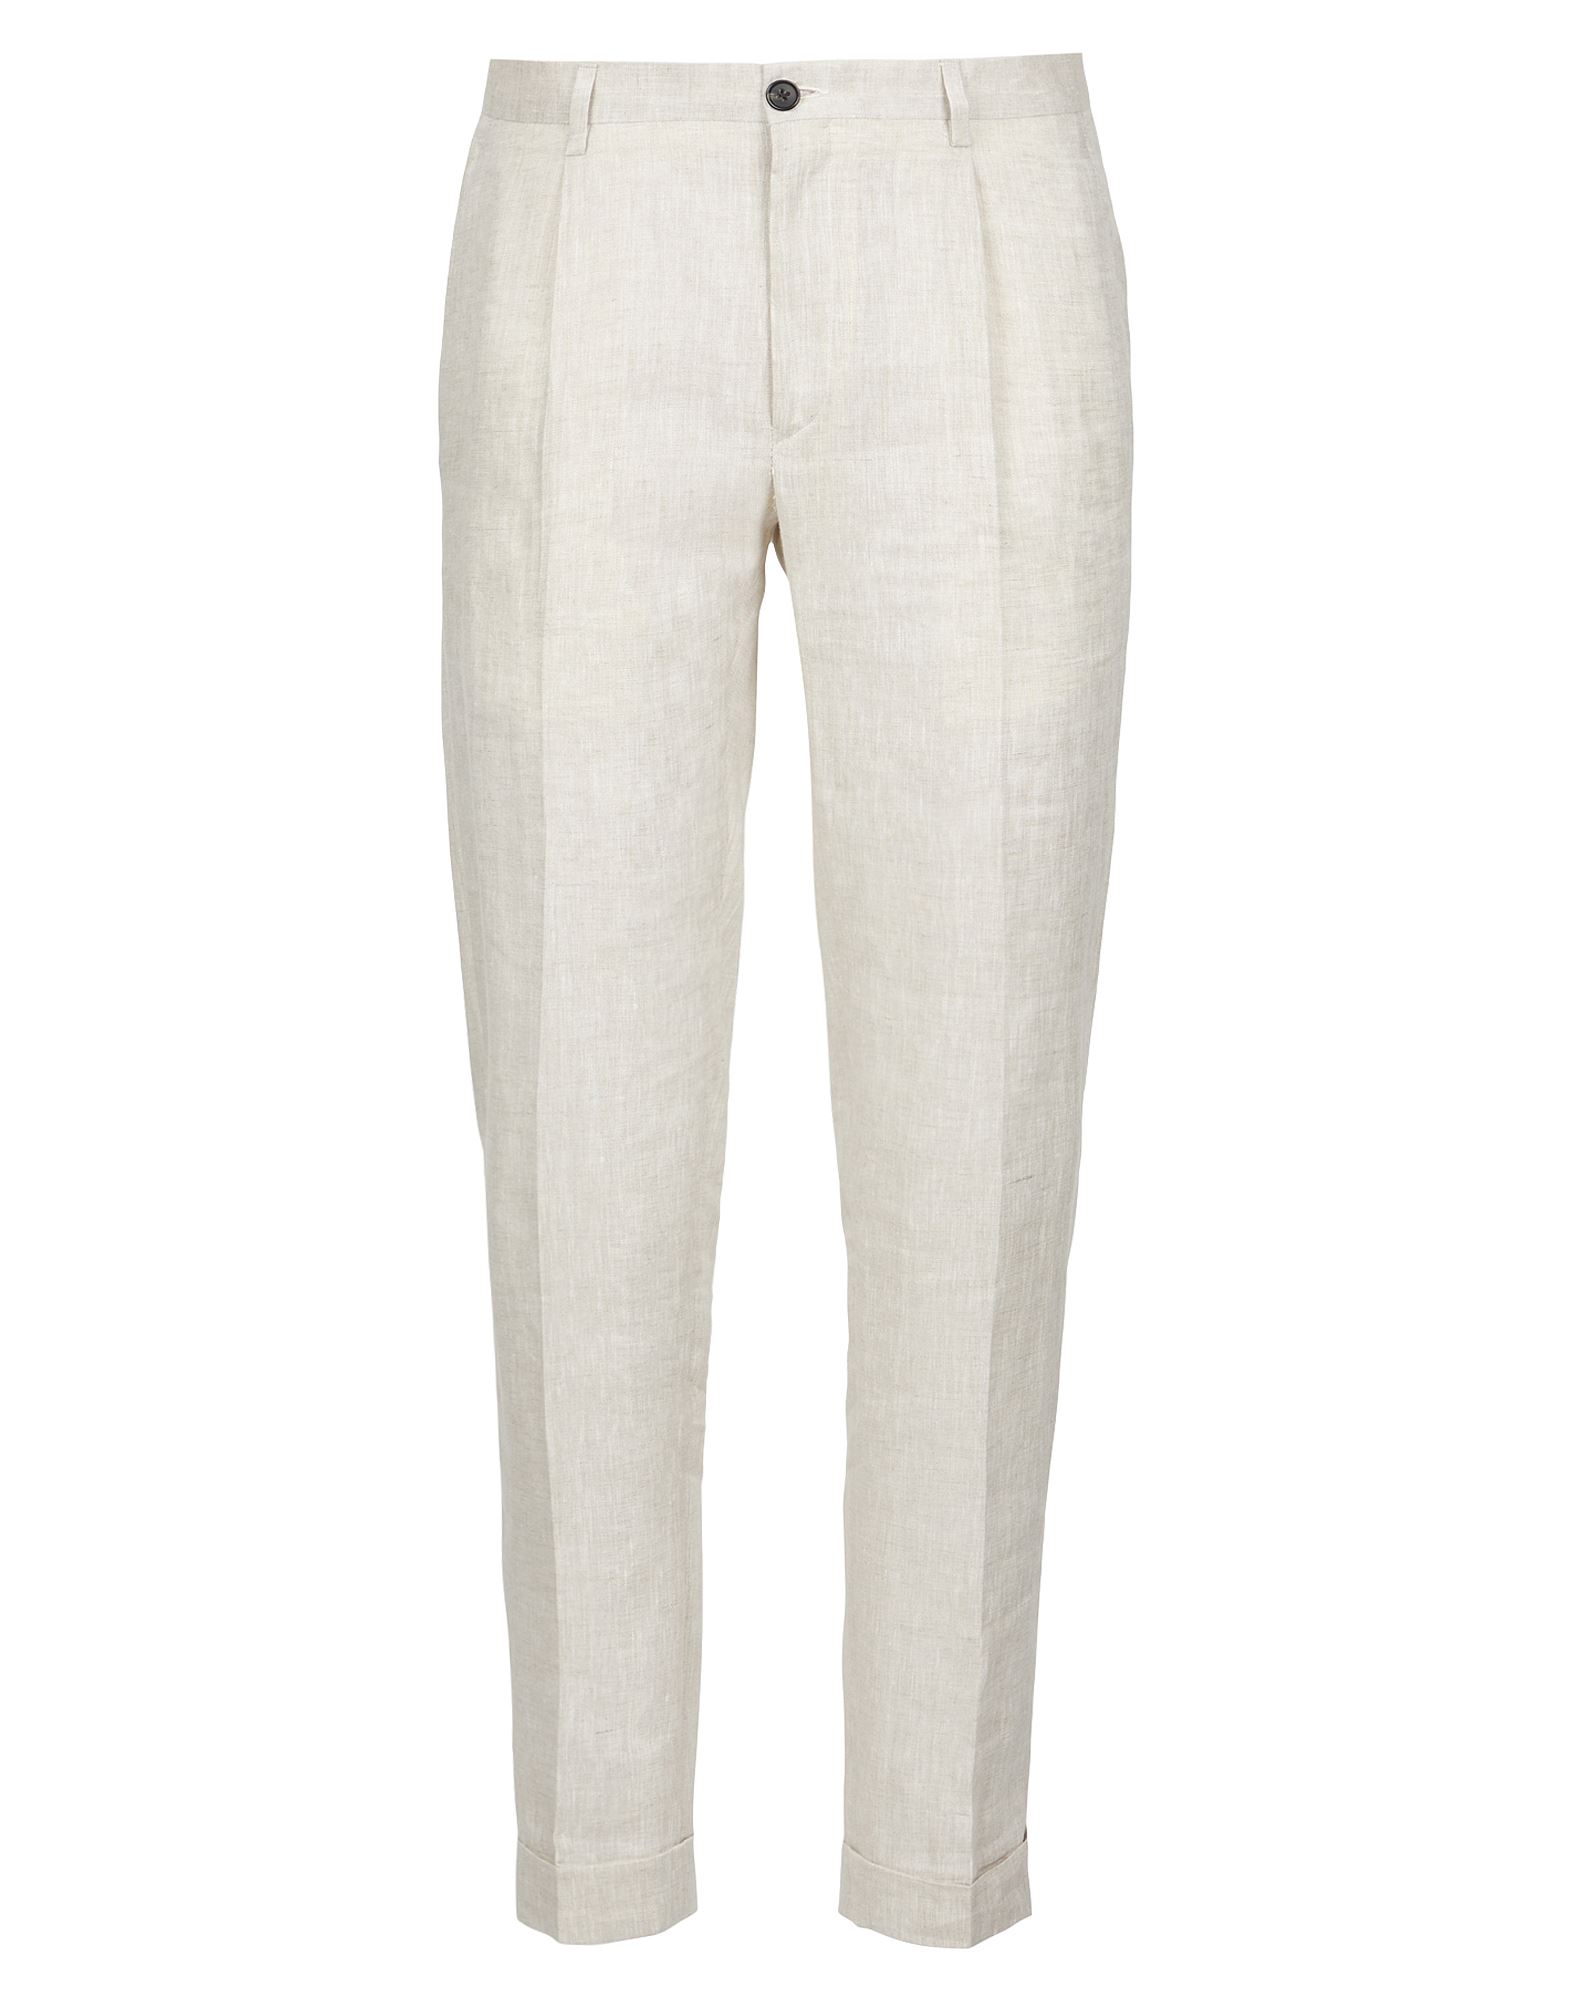 8 By Yoox Pants In White